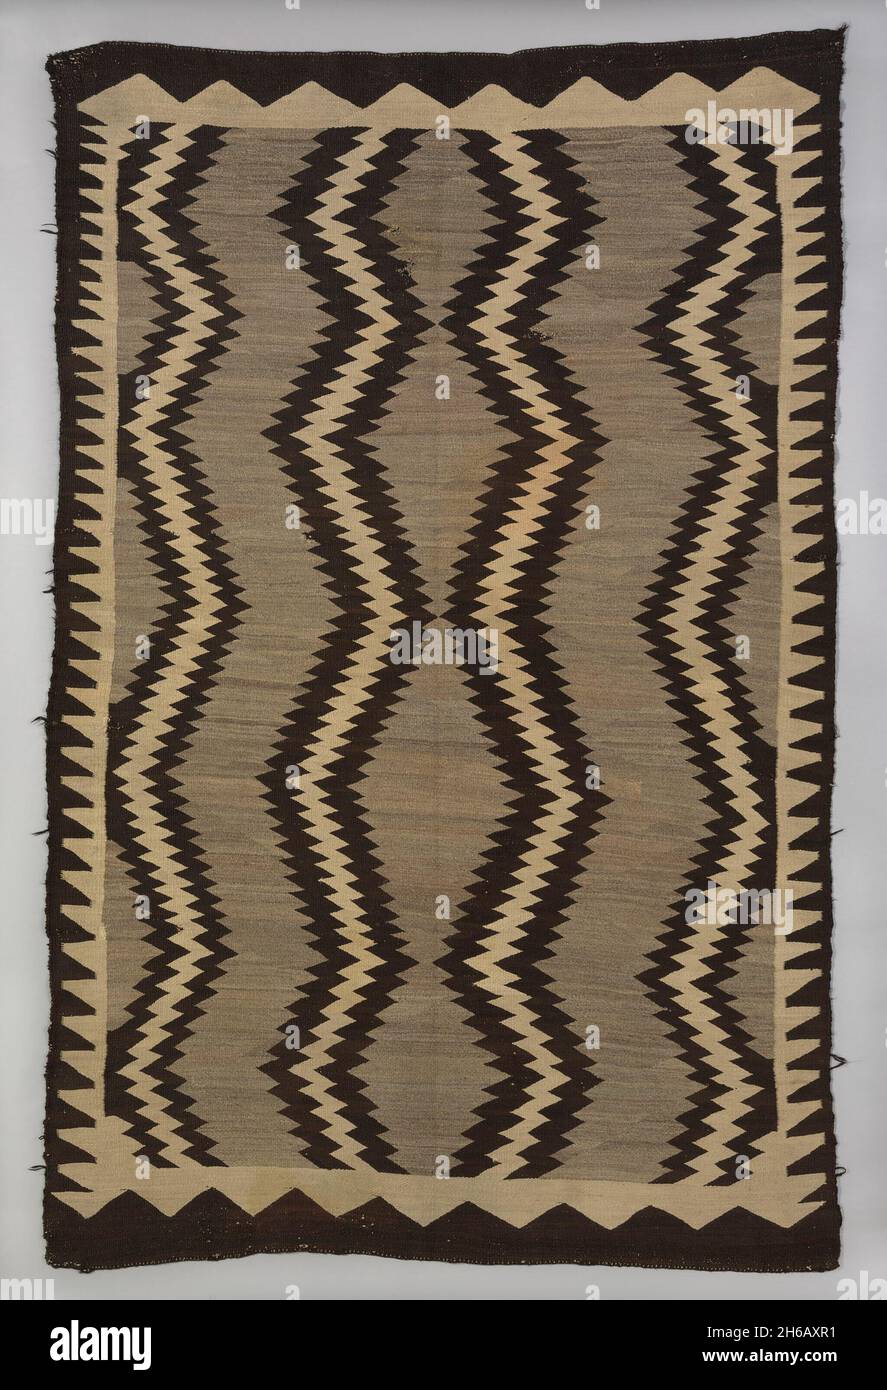 Blanket or Rug, United States, Late 19th century. Stock Photo